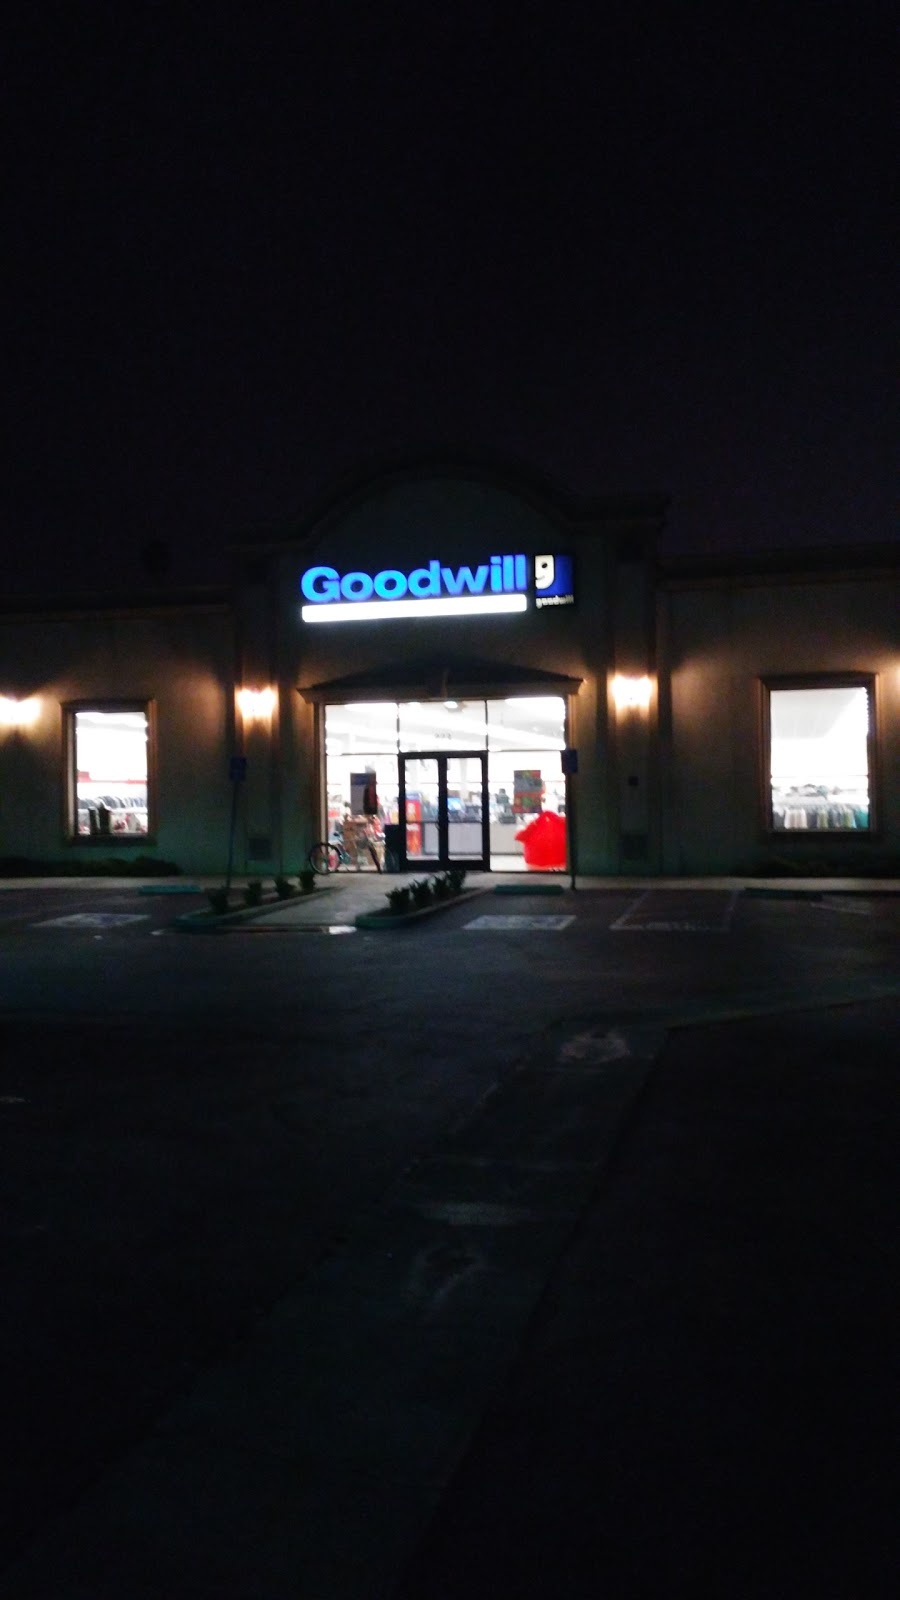 Goodwill Southern California Store & Donation Center | 233 W Colton Ave, Redlands, CA 92374, USA | Phone: (909) 335-2006